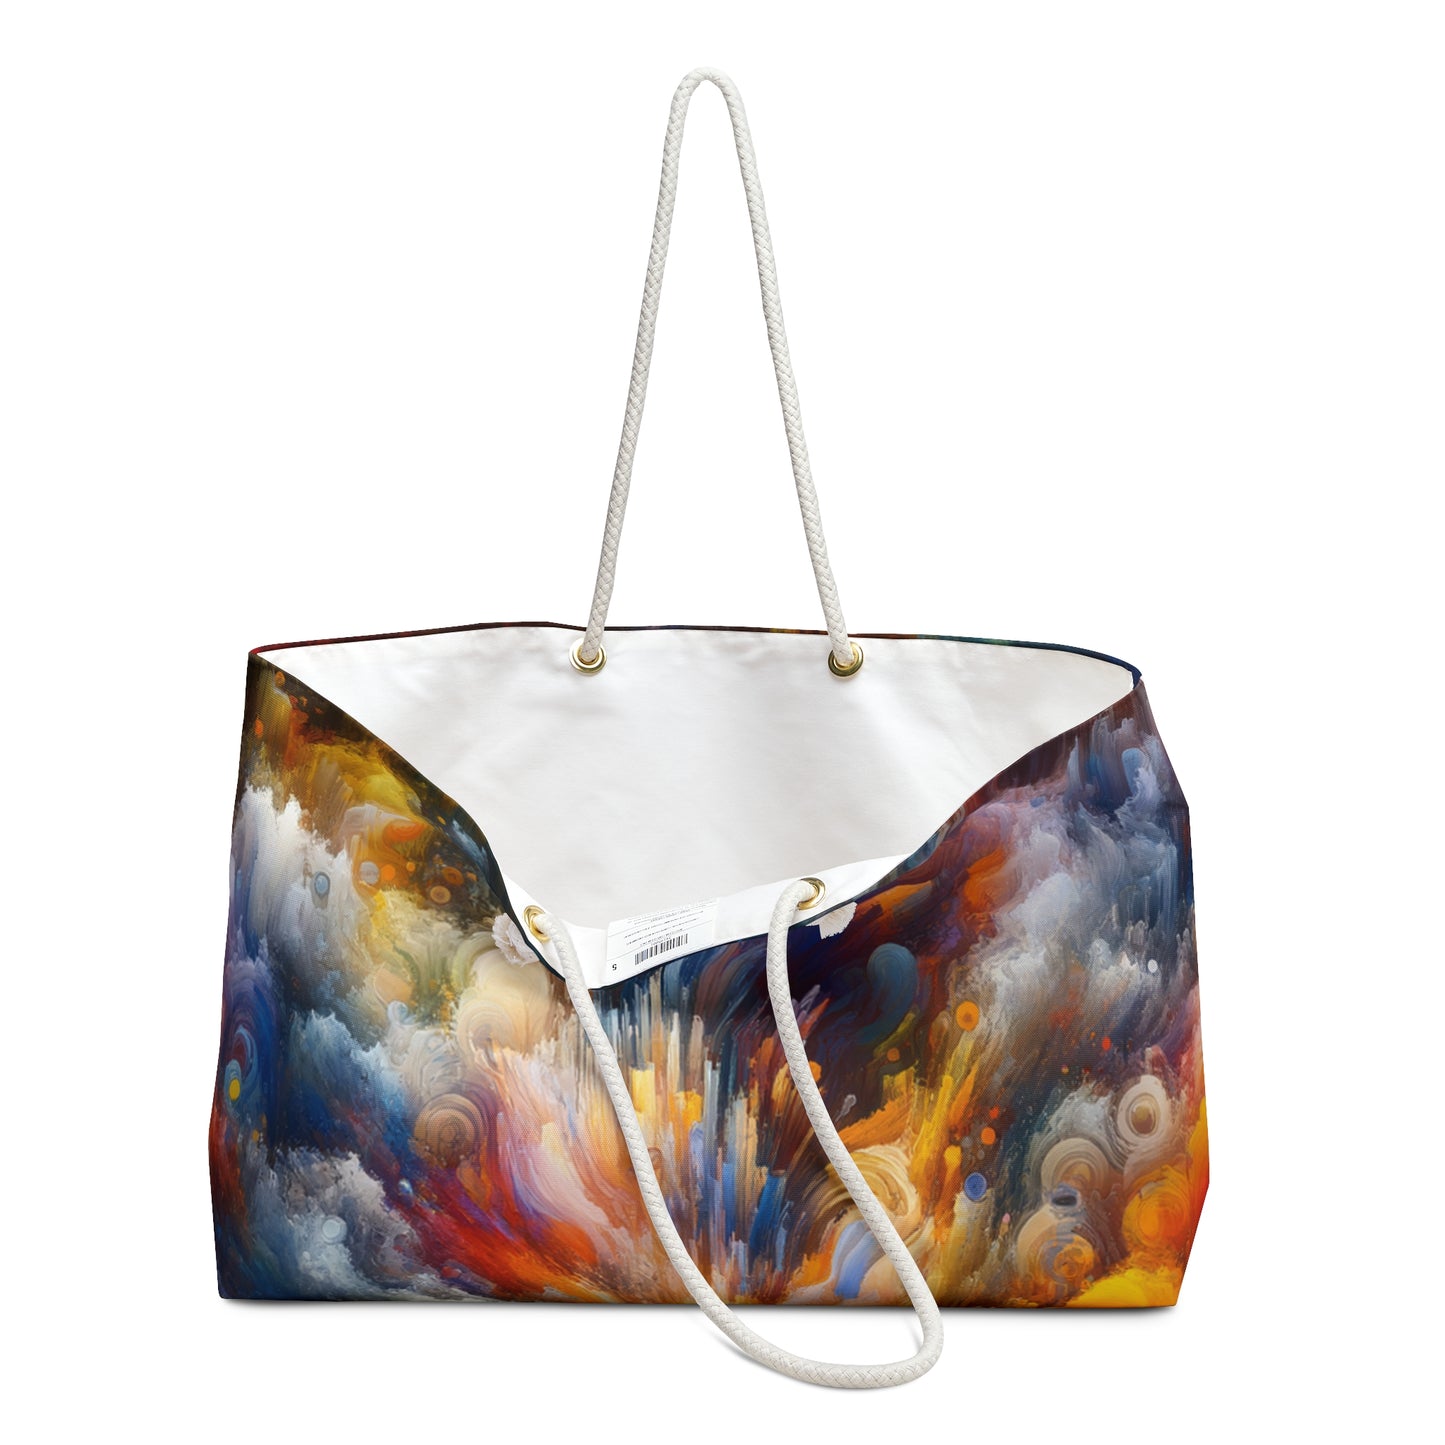 "Vibrant Chaos". - The Alien Weekender Bag Abstract Expressionism Style